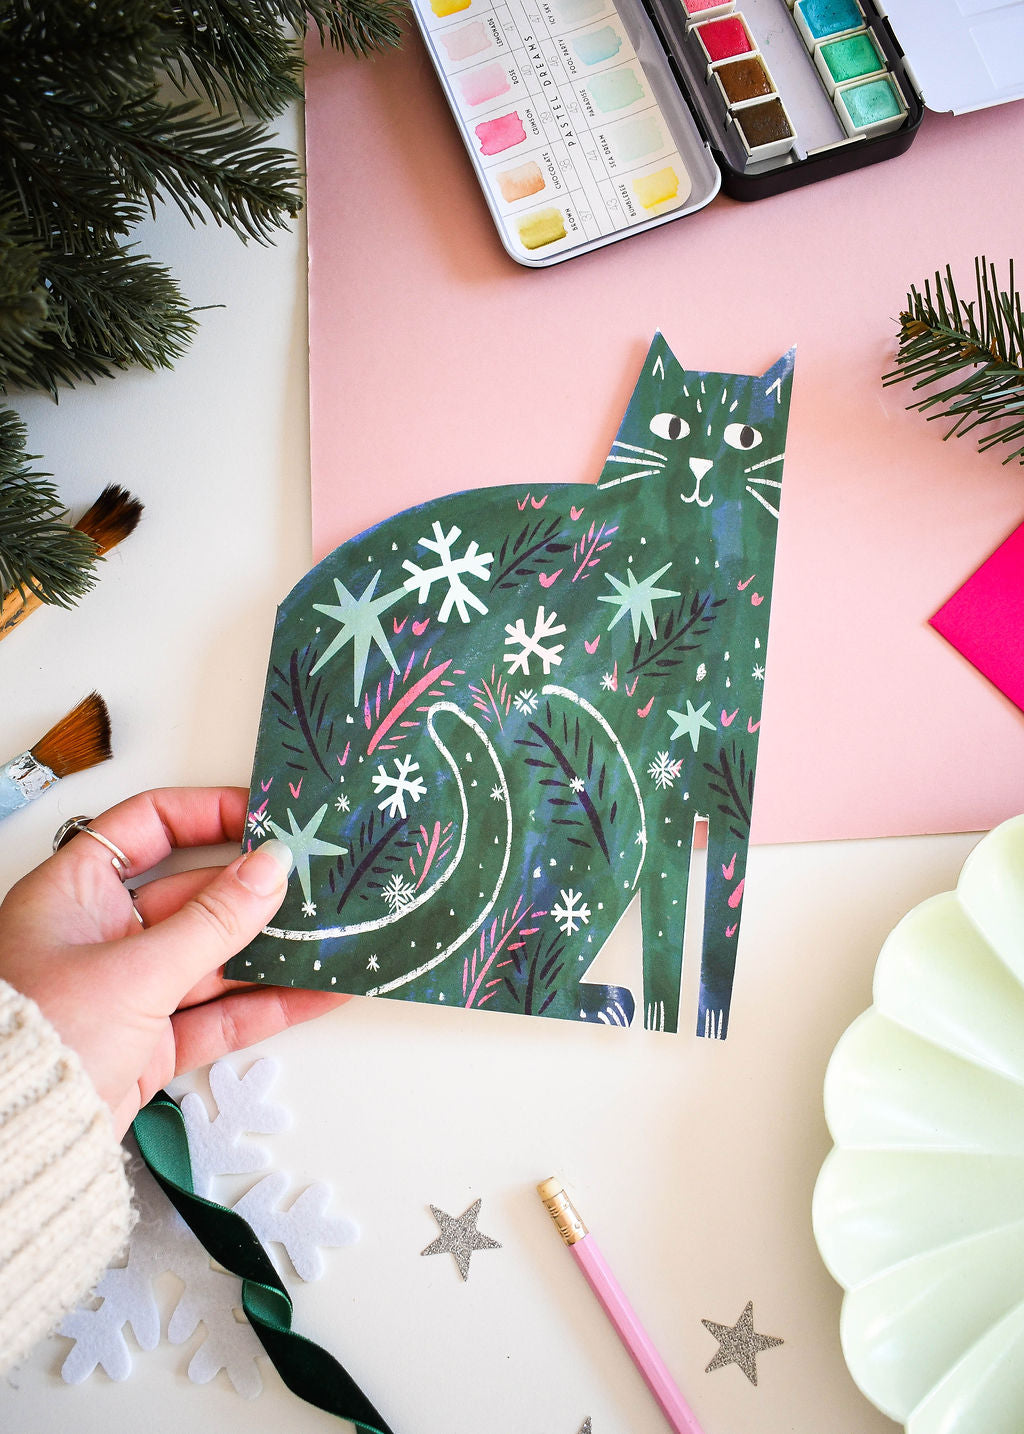 Green Cat Christmas cut out card